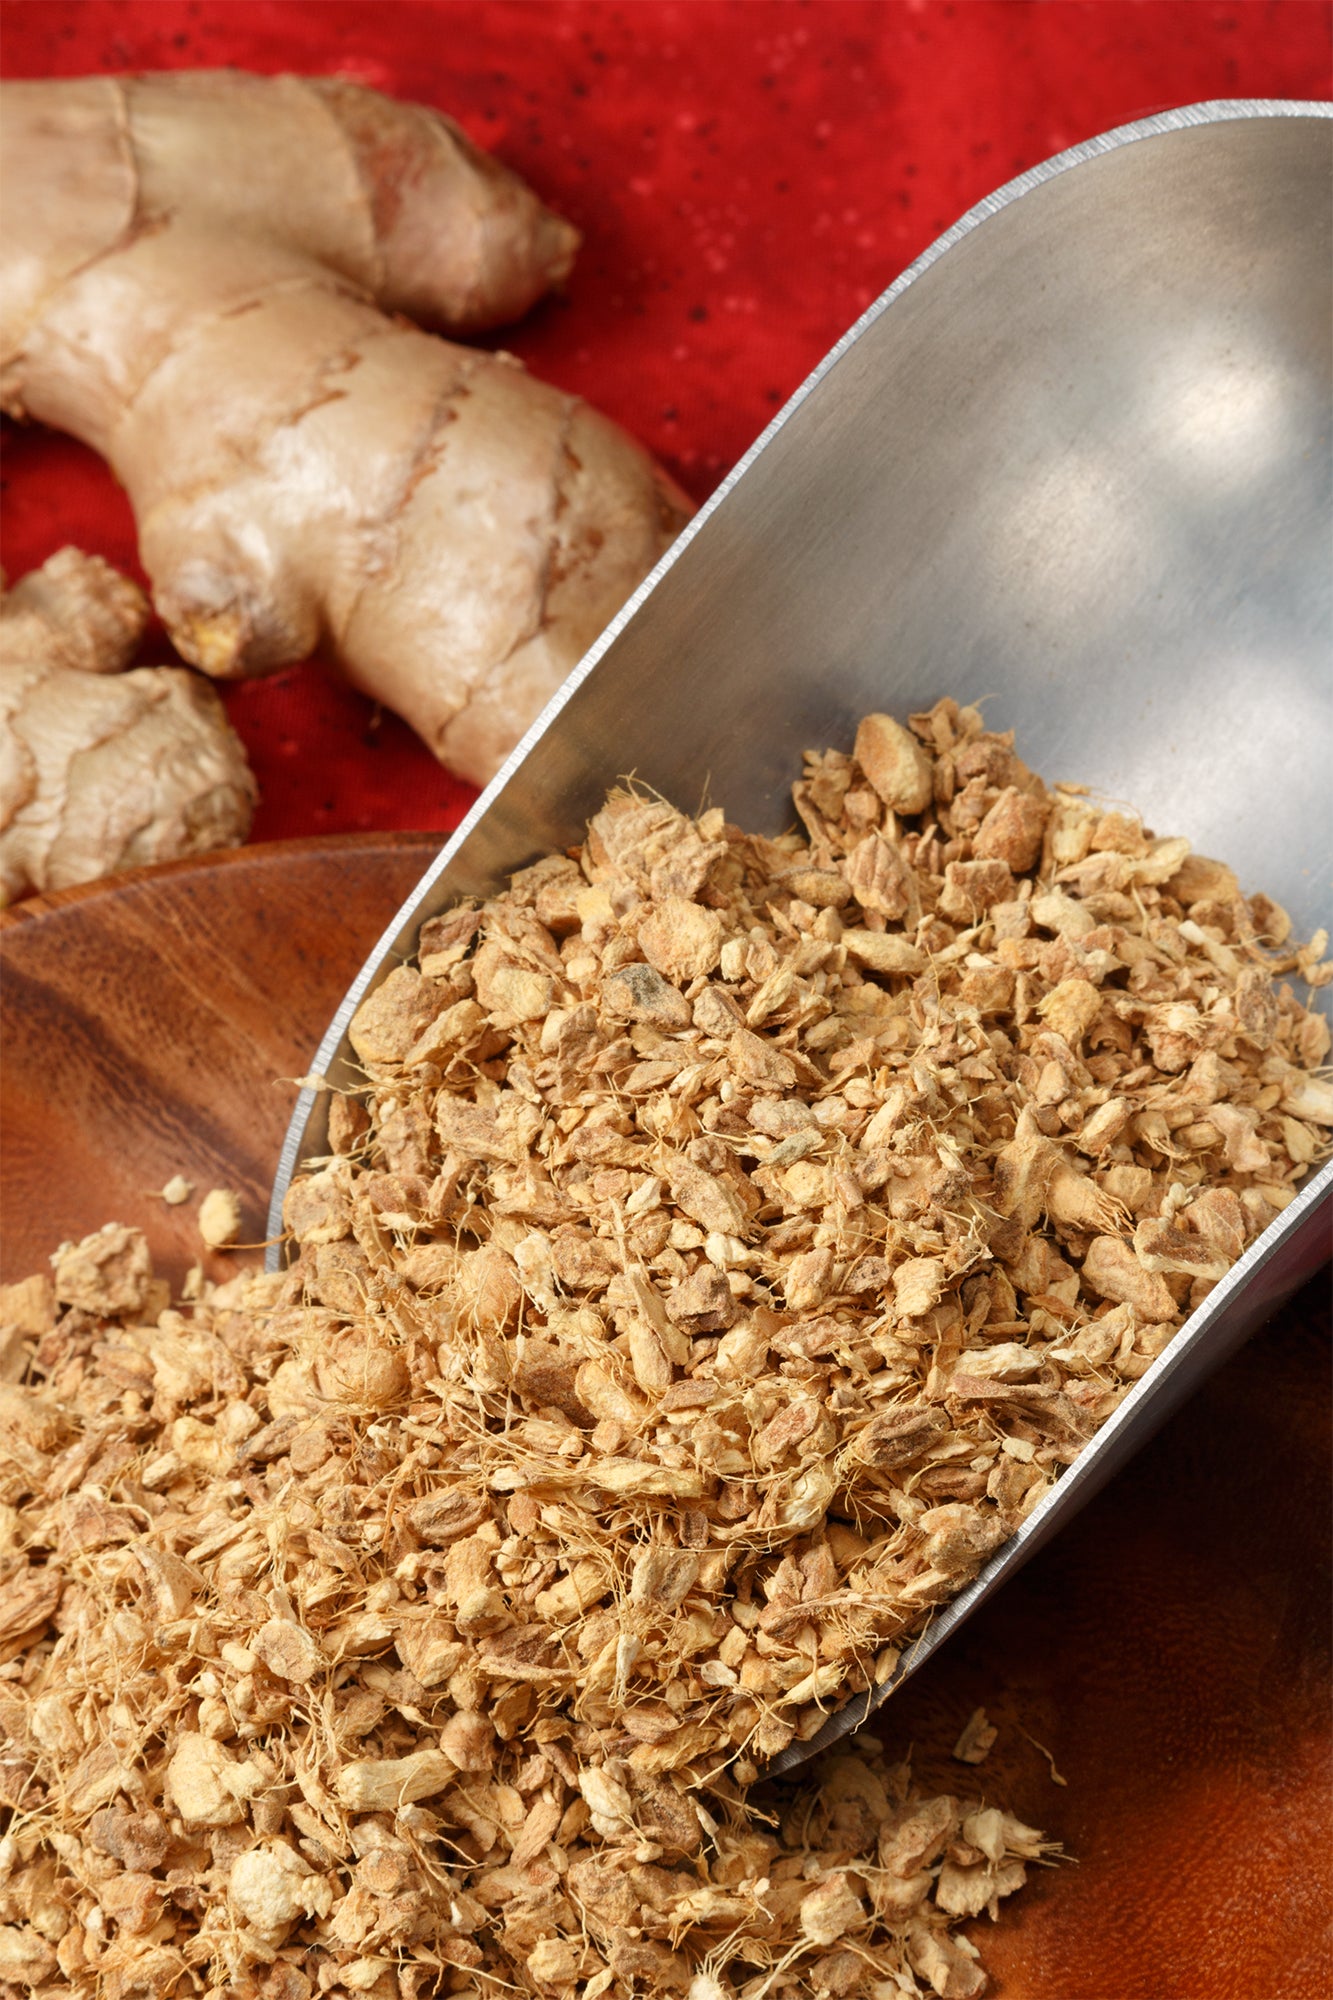 Oregon's Wild Harvest Non-GMO, Organic Ginger Root Cut-and-Sift